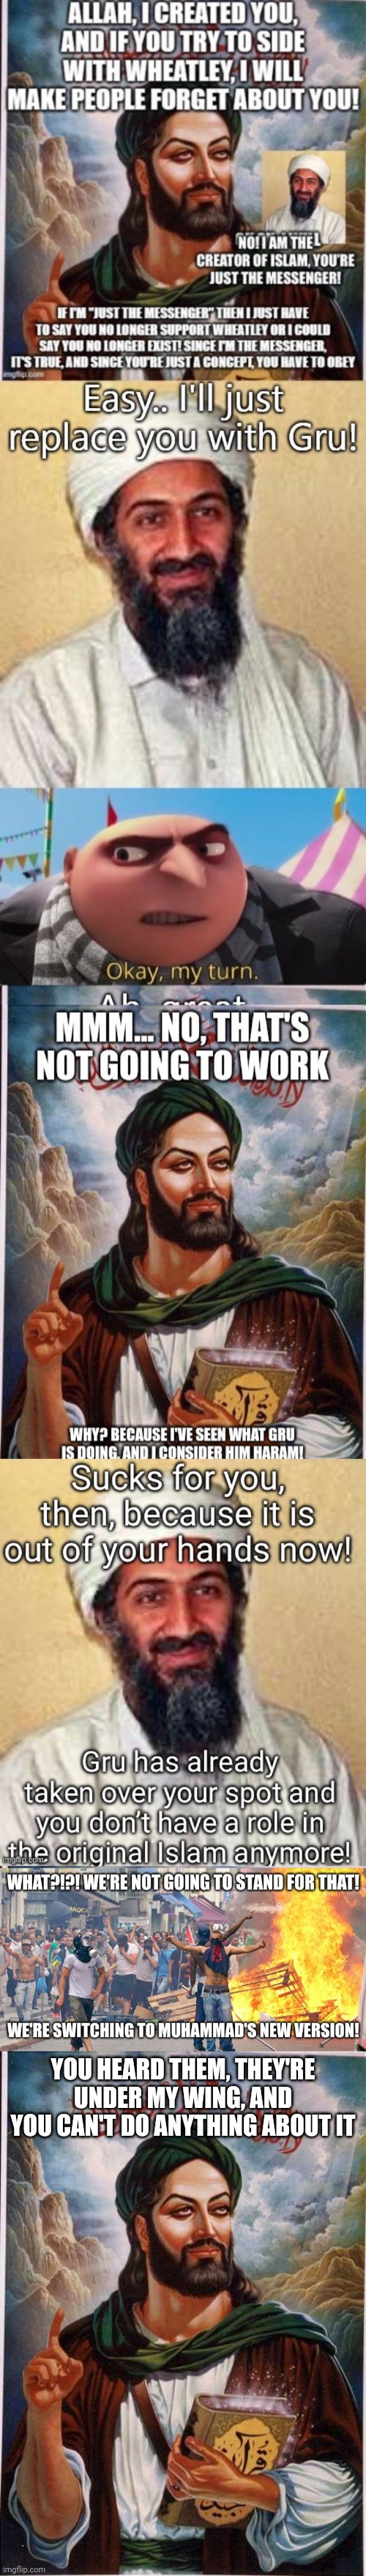 Bro... What about the people? They don't seem to like you | YOU HEARD THEM, THEY'RE UNDER MY WING, AND YOU CAN'T DO ANYTHING ABOUT IT | image tagged in mohammed | made w/ Imgflip meme maker